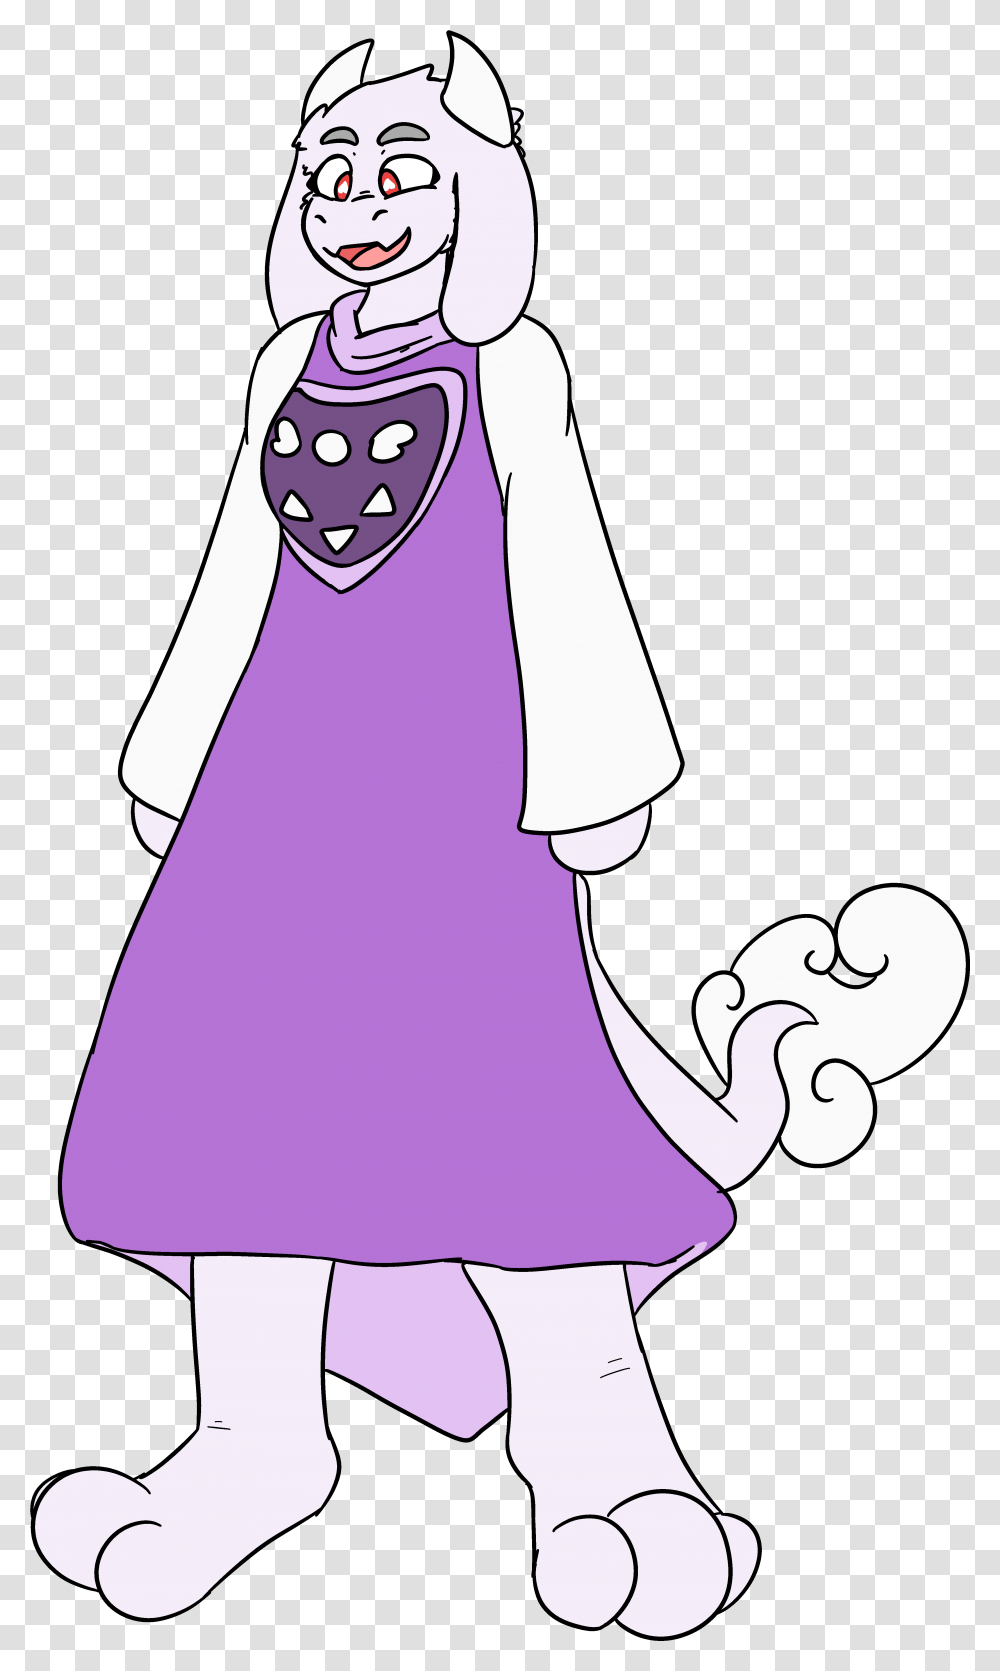 Toriel Drawe By Asriel Hell On Newgrounds Cartoon, Clothing, Sleeve, Long Sleeve, Dress Transparent Png